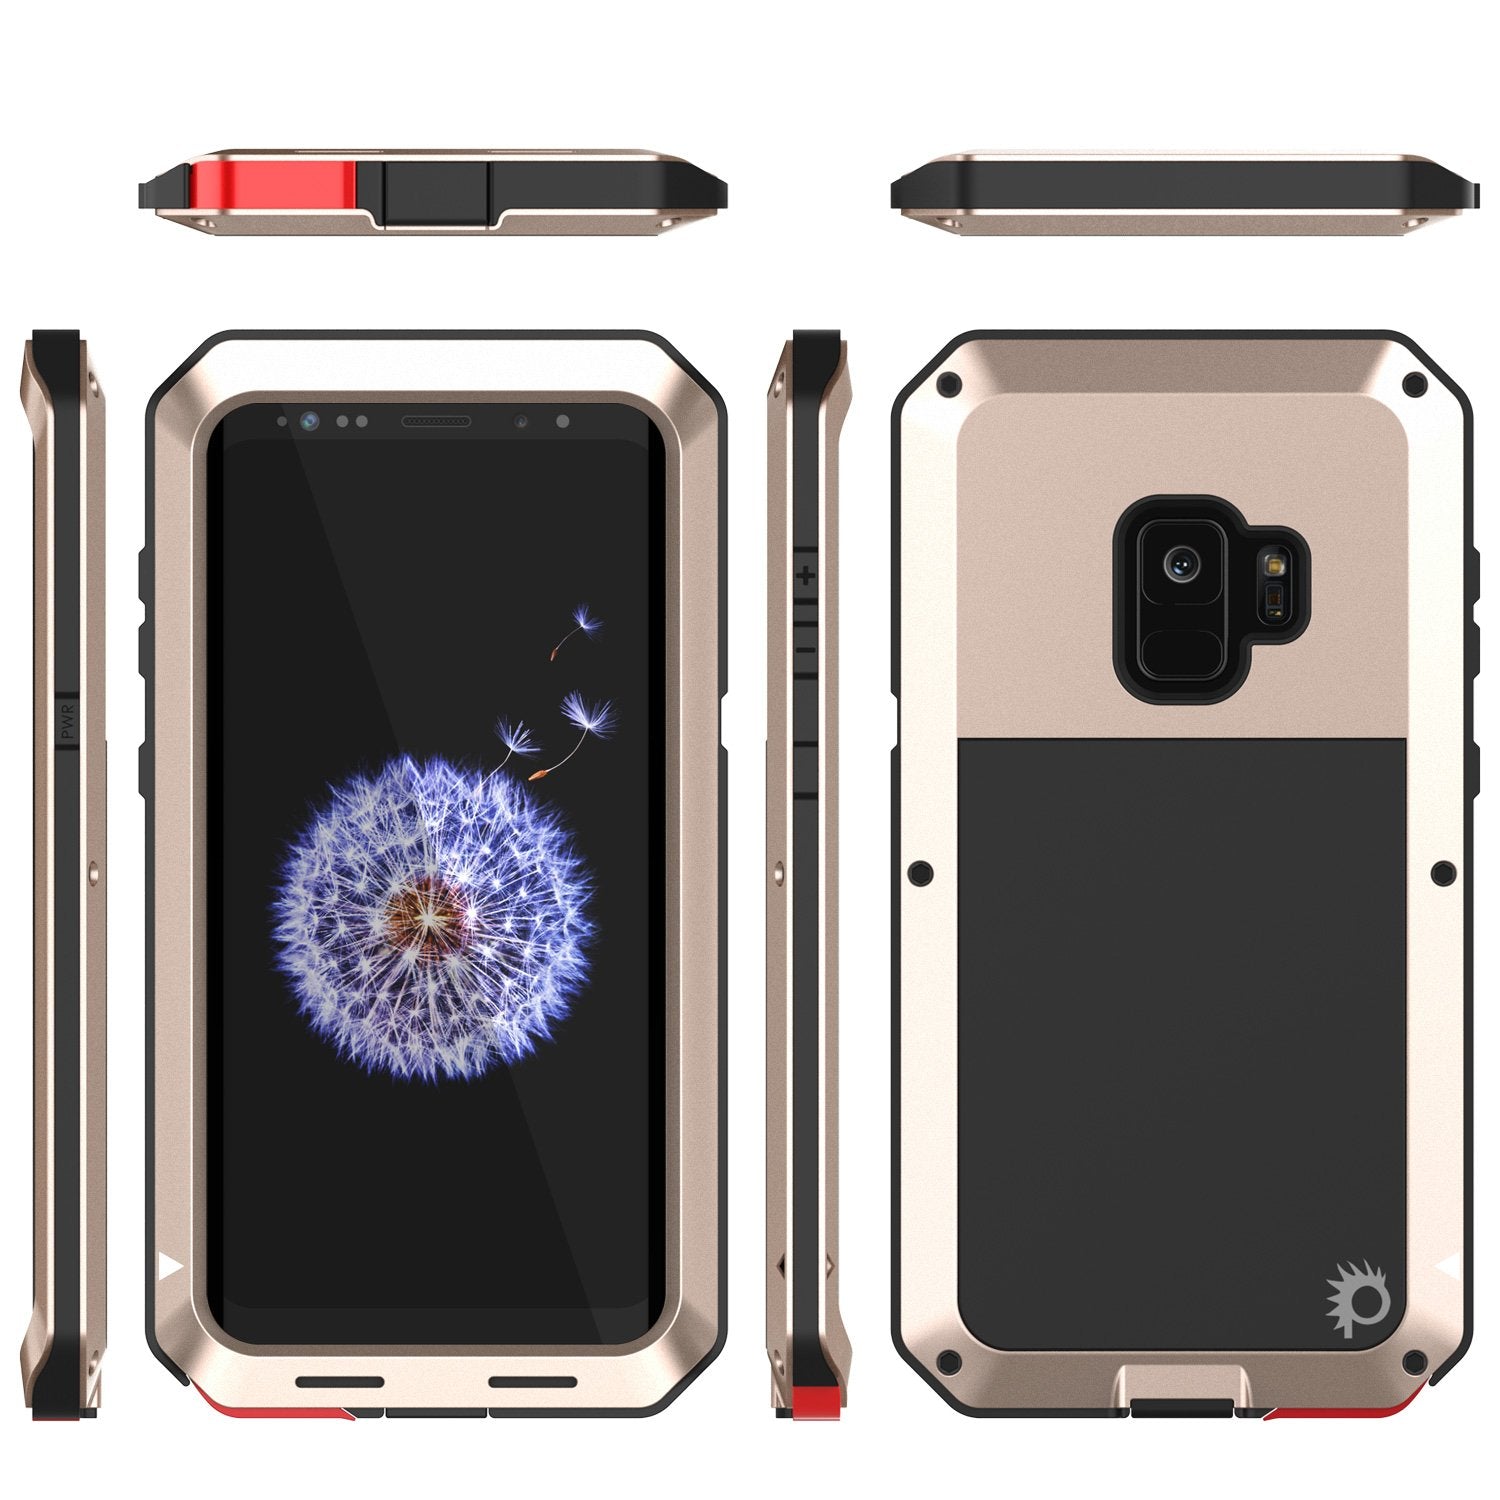 Galaxy S9 Metal Case, Heavy Duty Military Grade Rugged case [Gold]